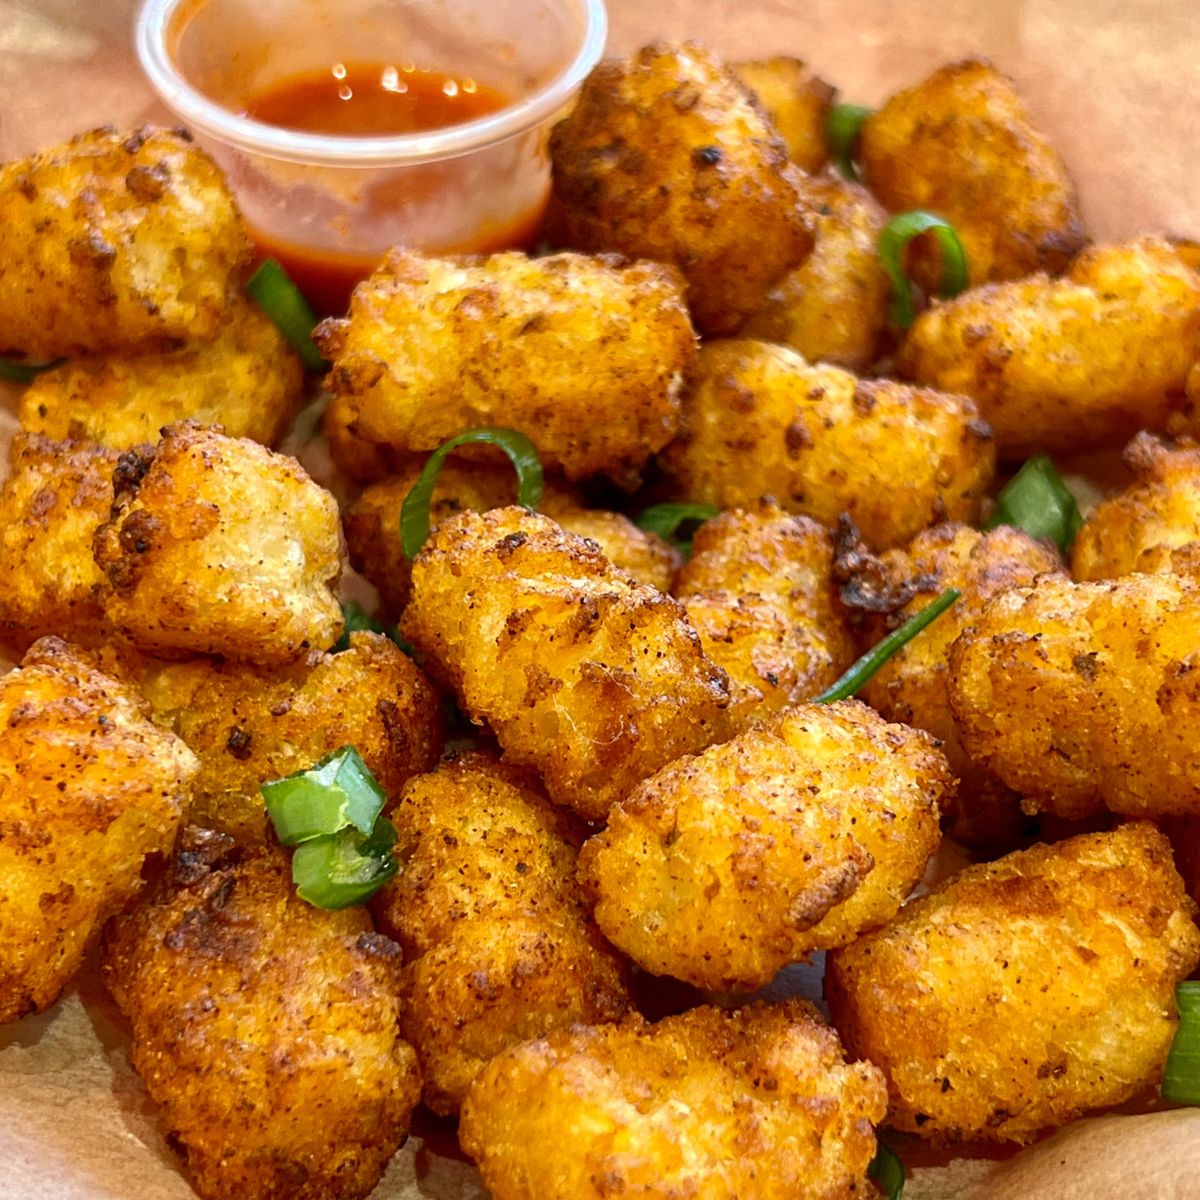 Air Fryer Tater Tots with a side of hot sauce